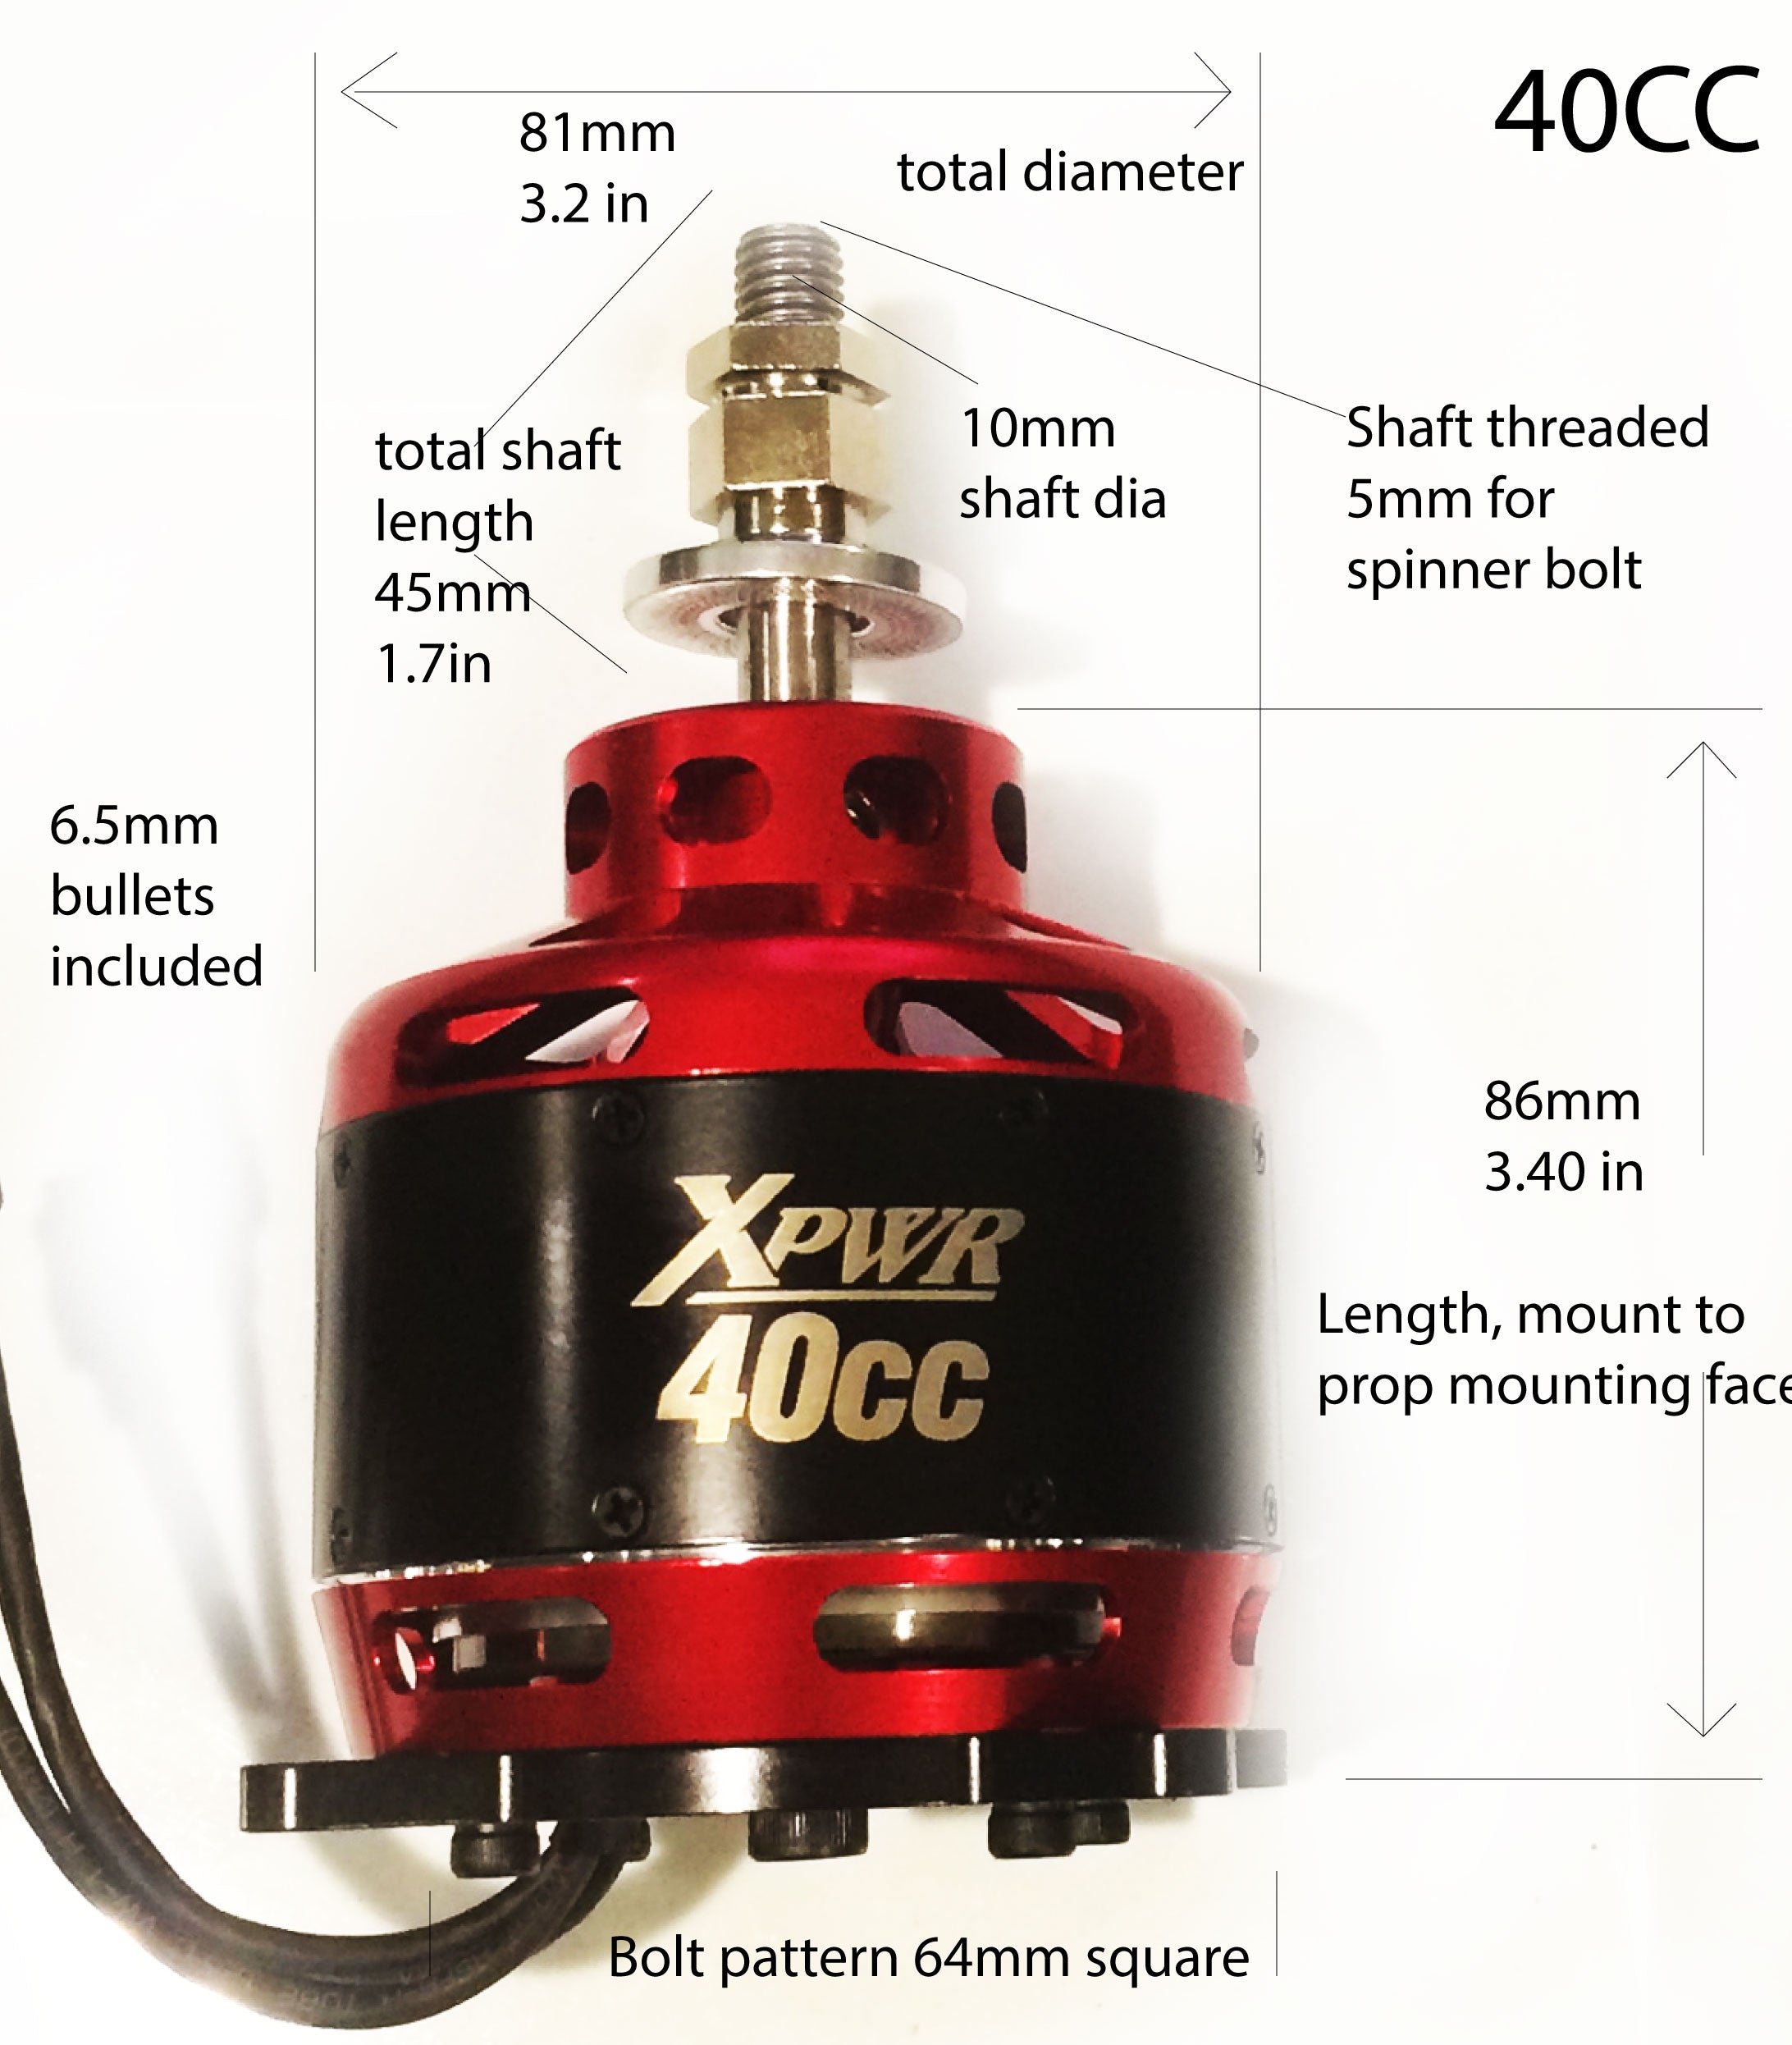 Xpwr 40CC Motor from Extreme Flight XPWR-40CC